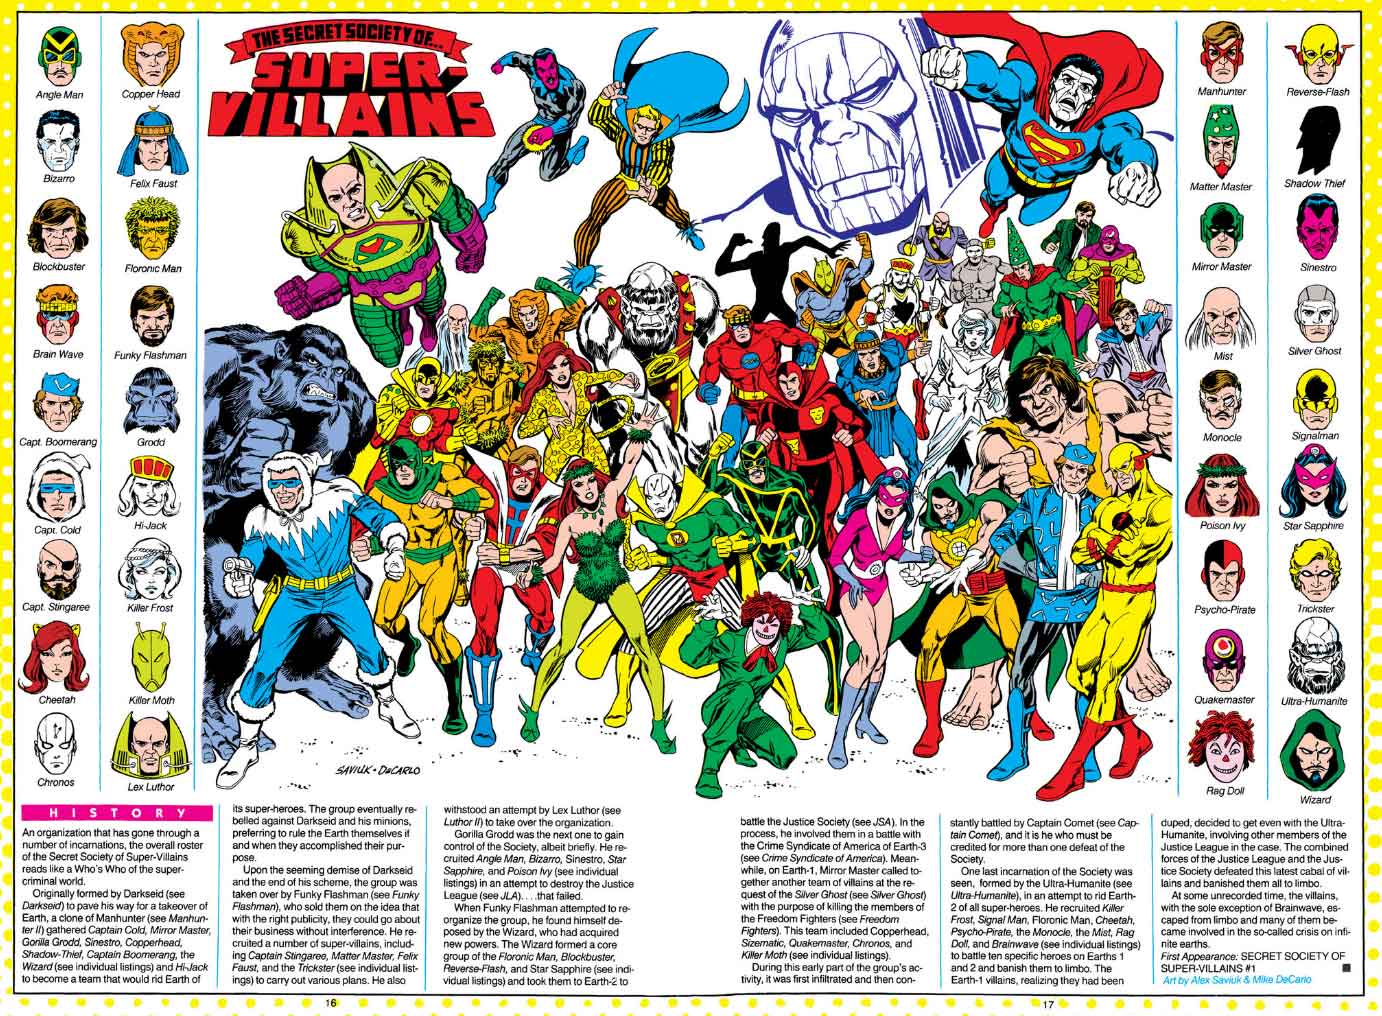 The Secret Society of Super-Villains by Alex Saviuk and Mike DeCarlo